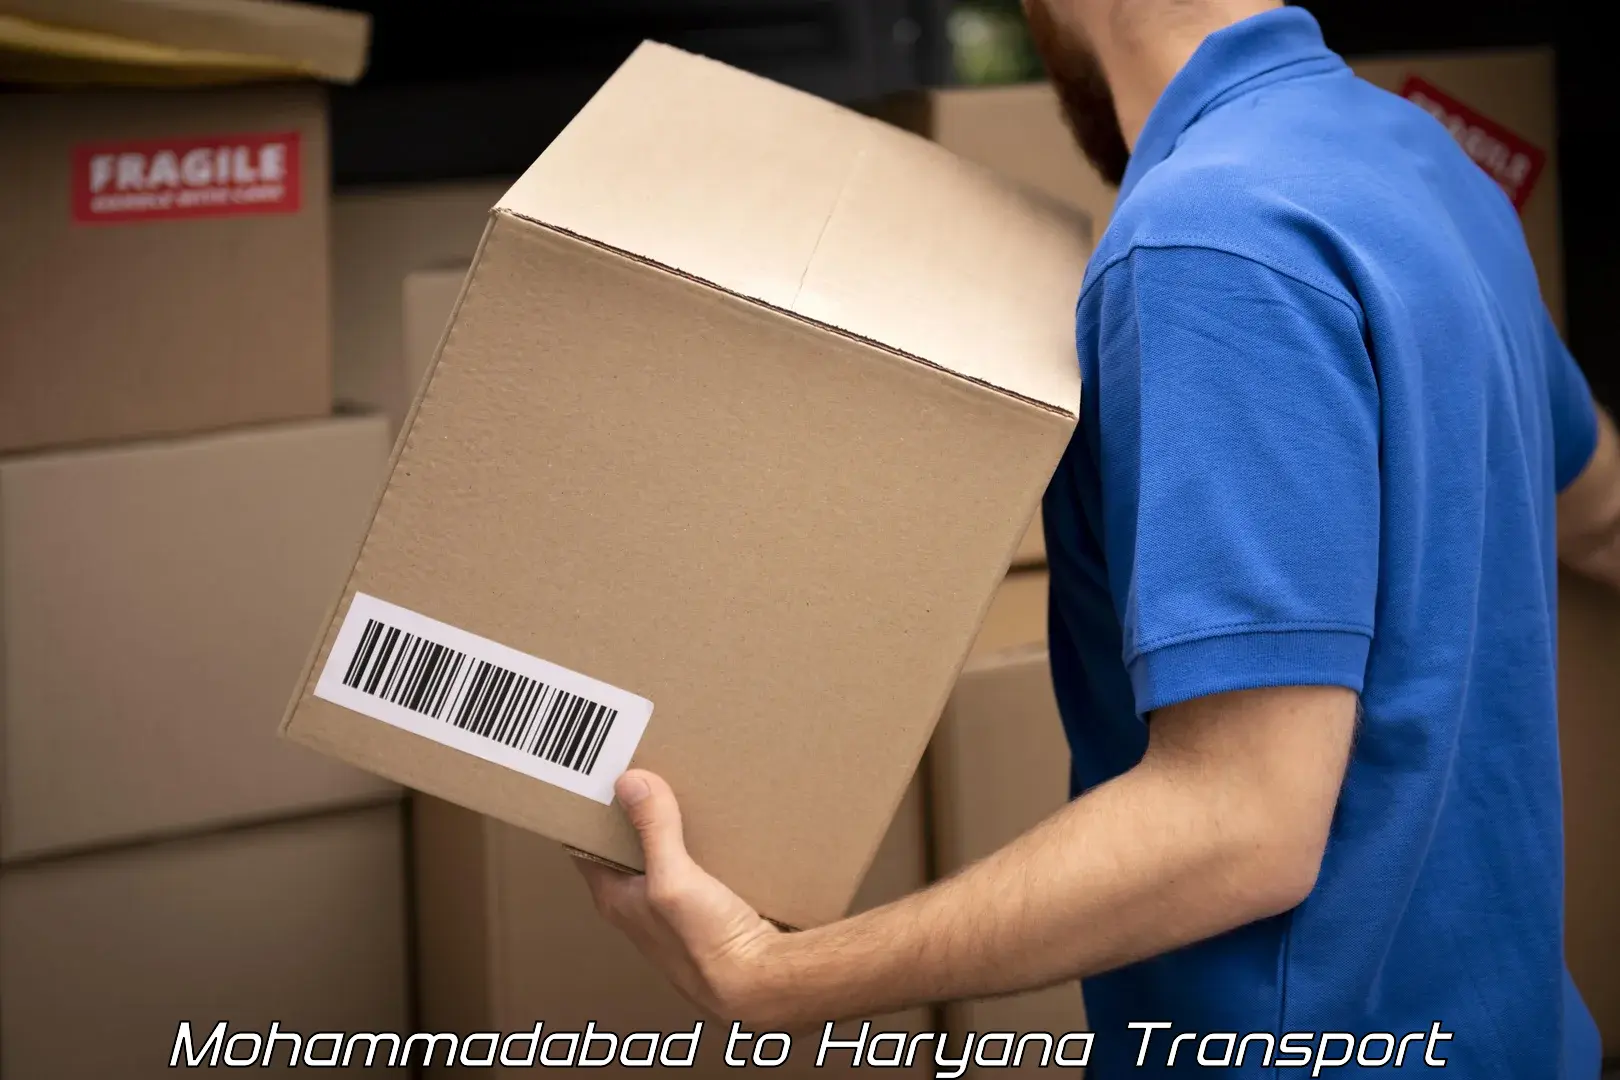 Two wheeler transport services in Mohammadabad to NCR Haryana